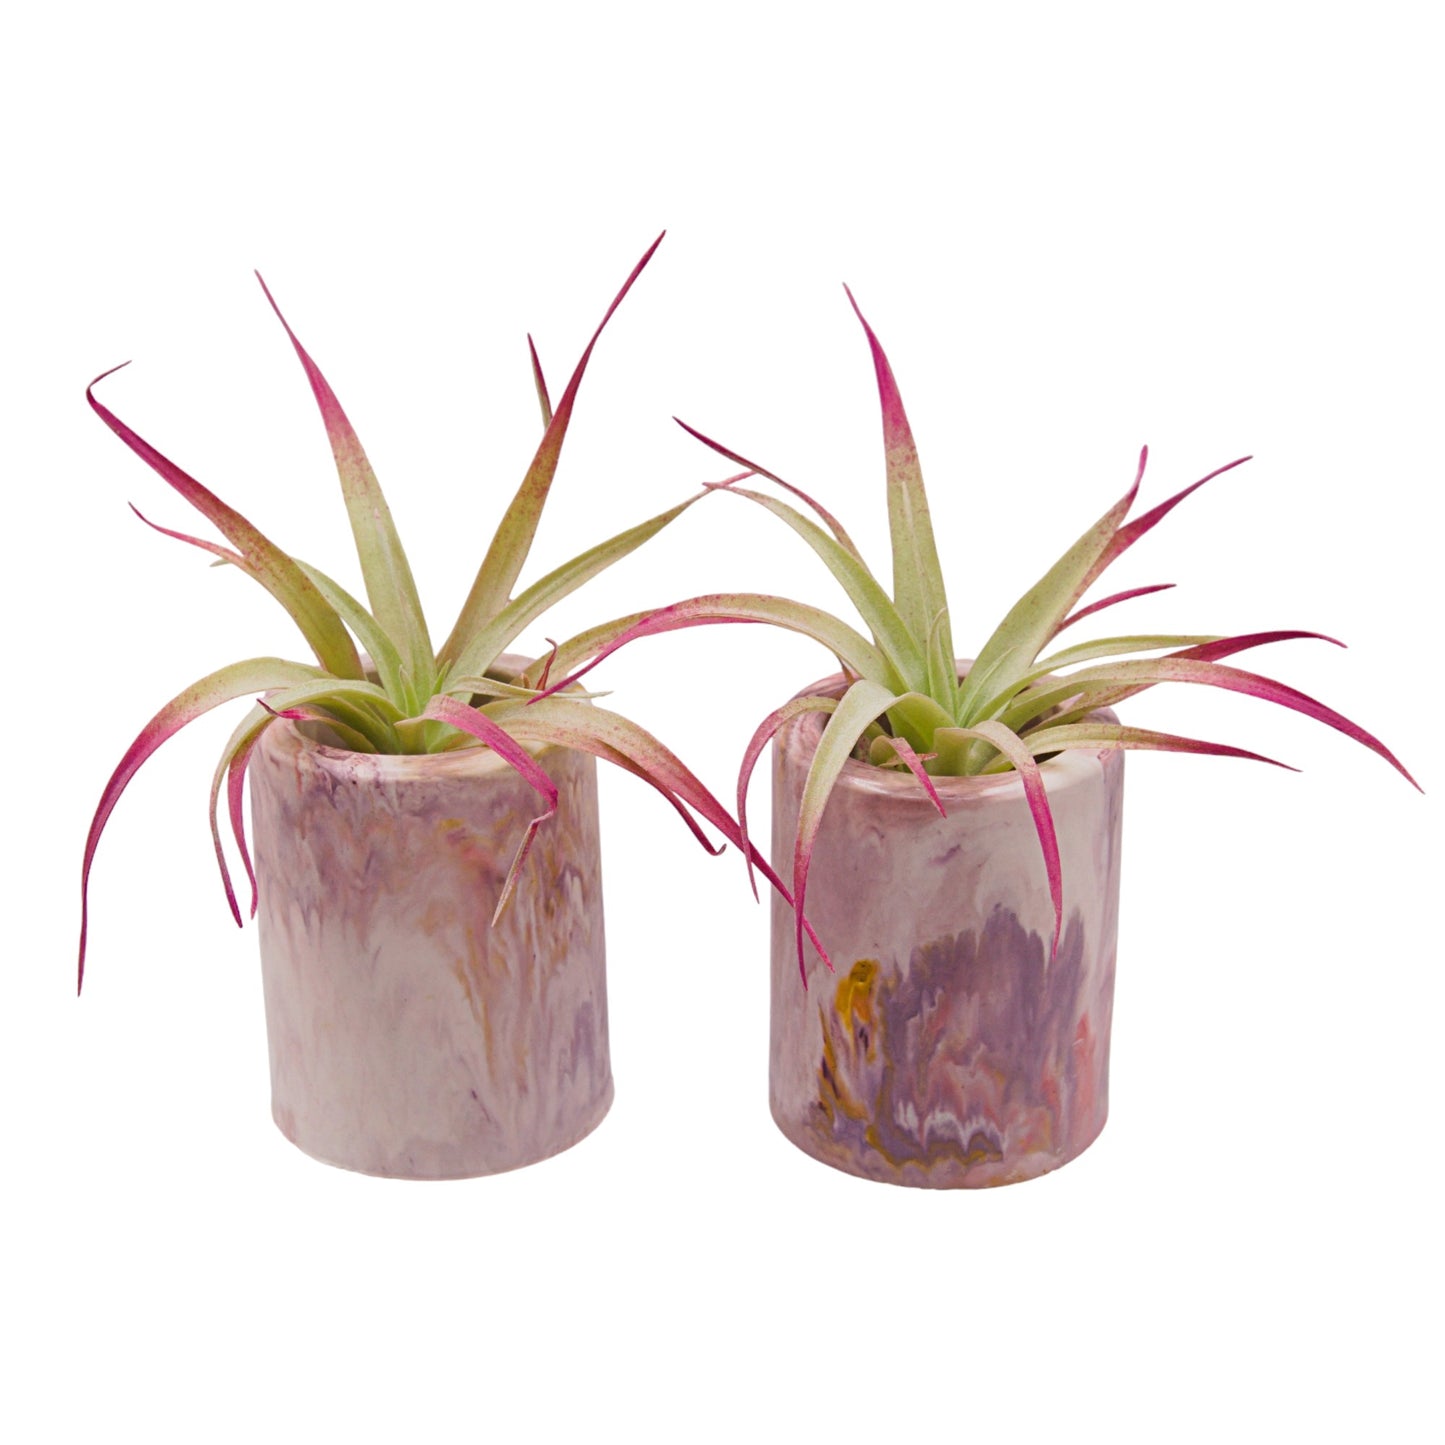 Sunset-inspired marbled hydrostone airplant pots